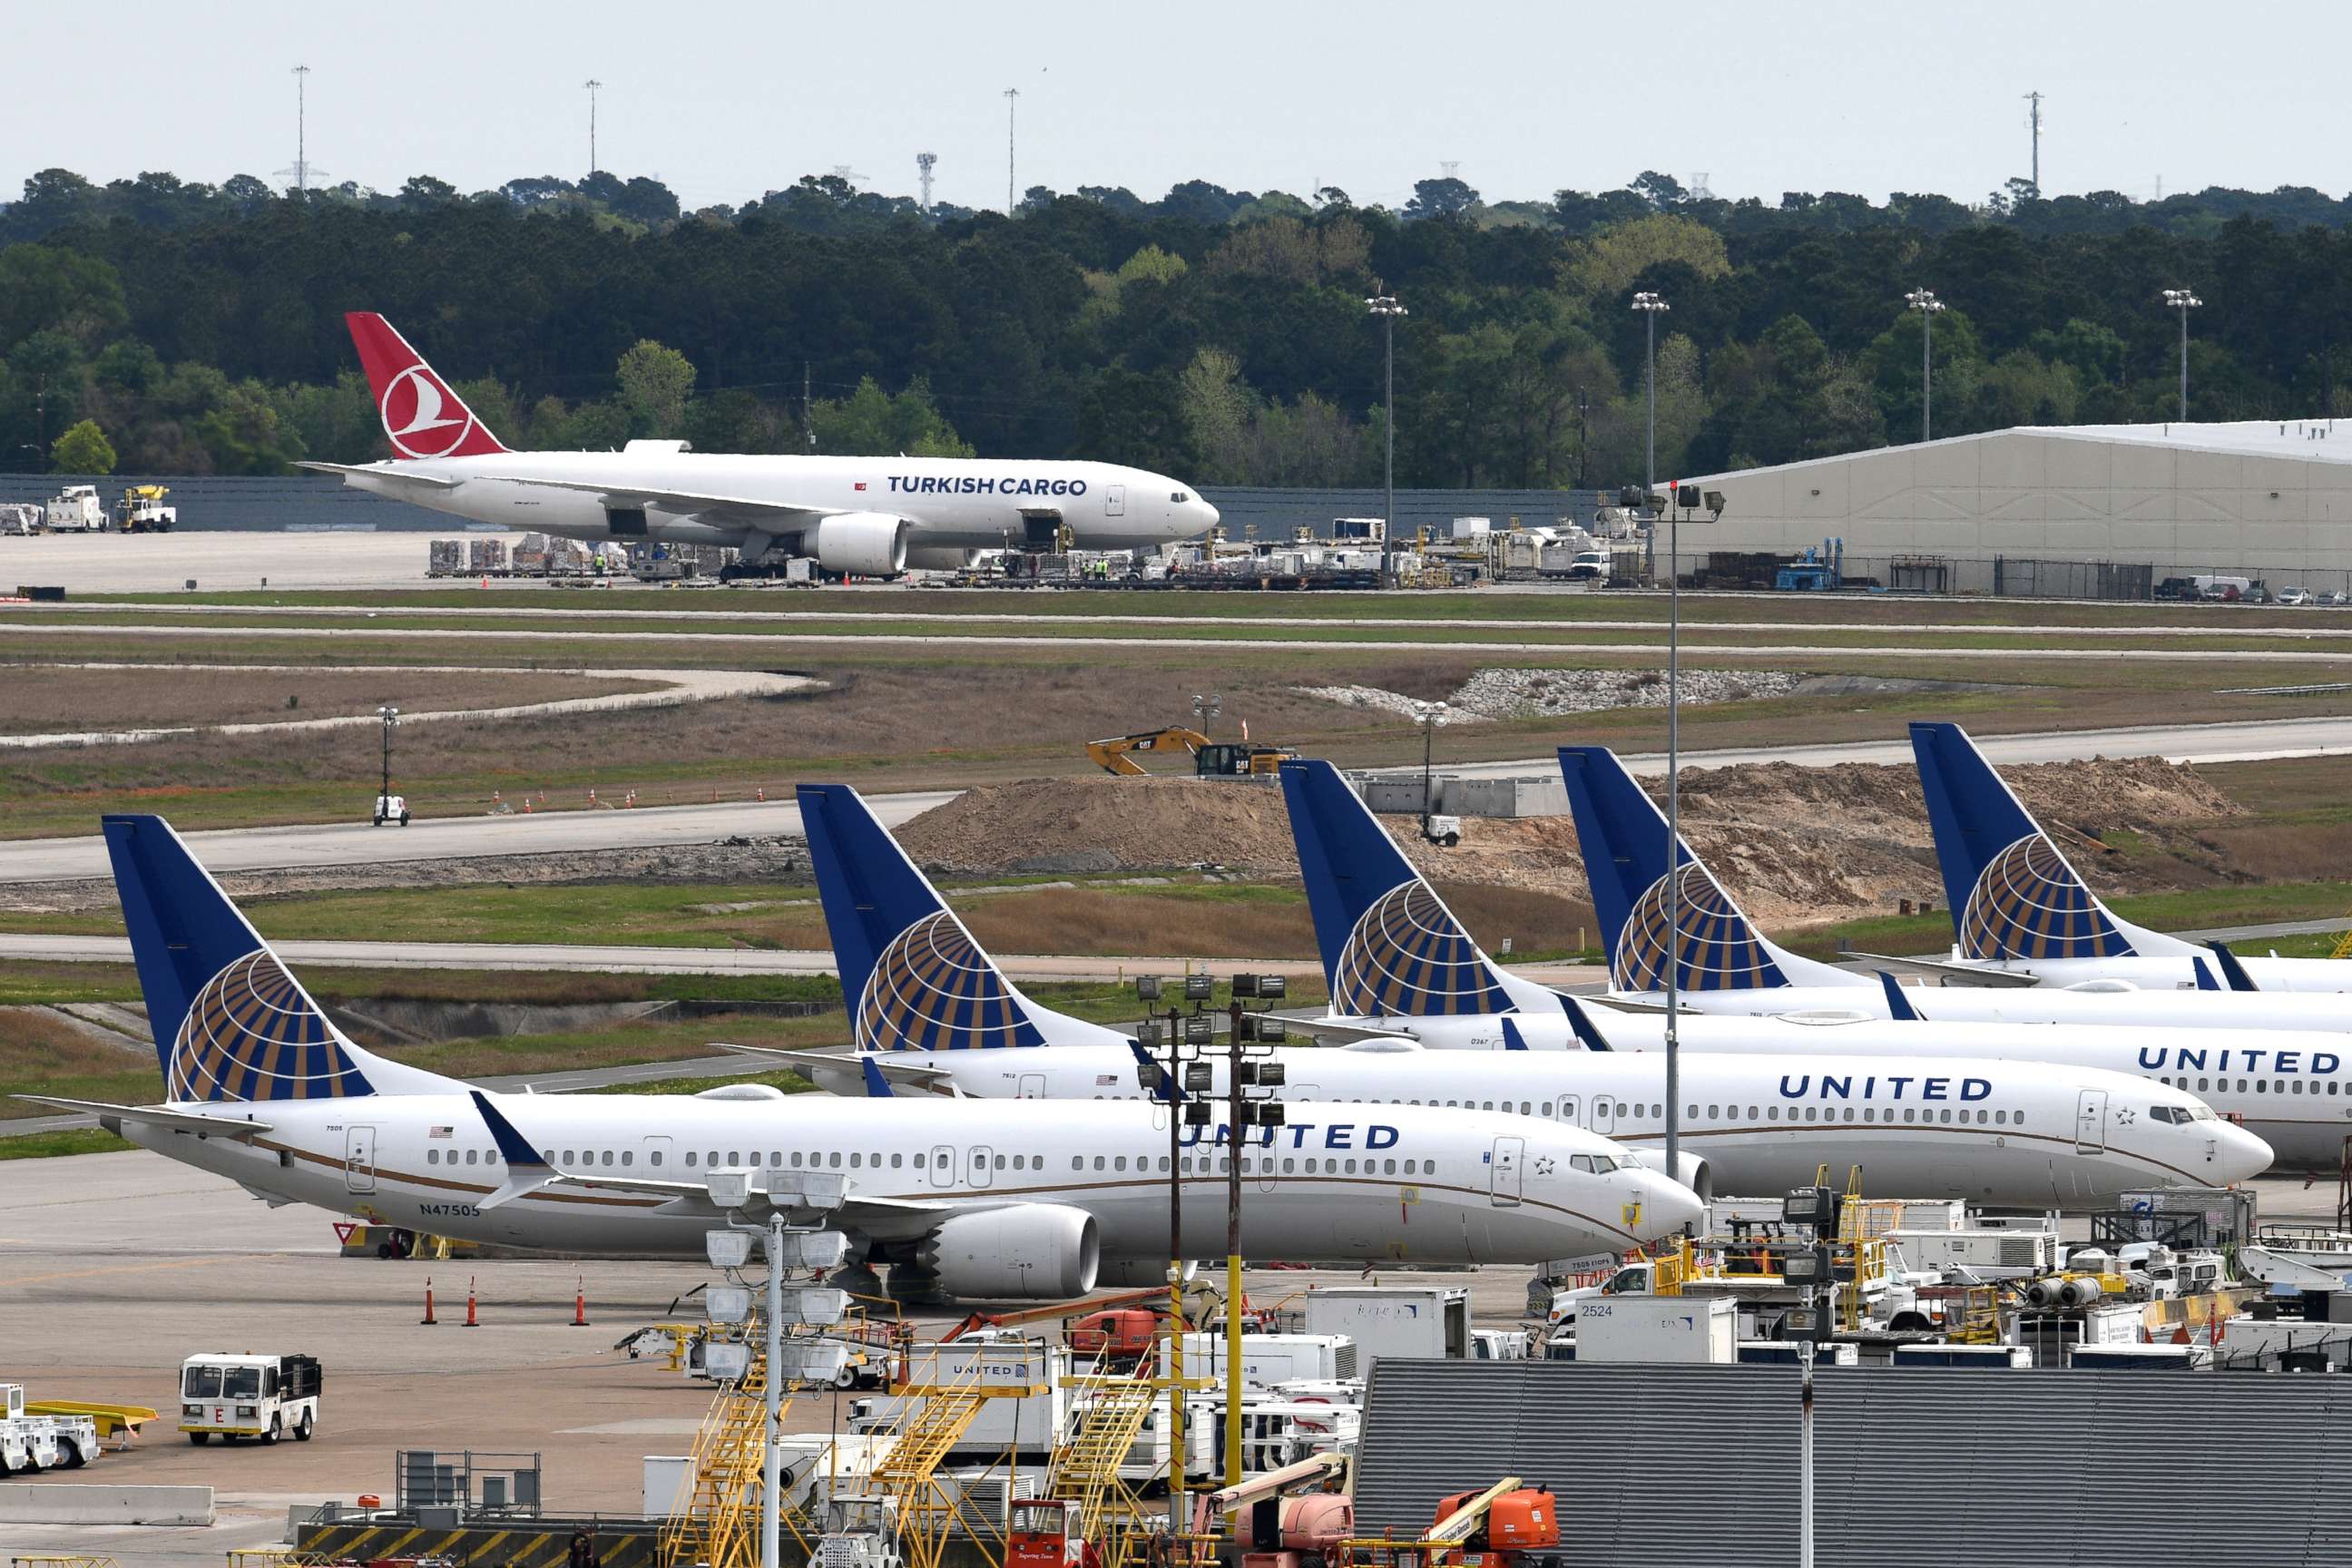 FILE PHOTO: United Airlines planes are pictured at George Bush Intercontinental Airport in Houston, on March 18, 2019. 